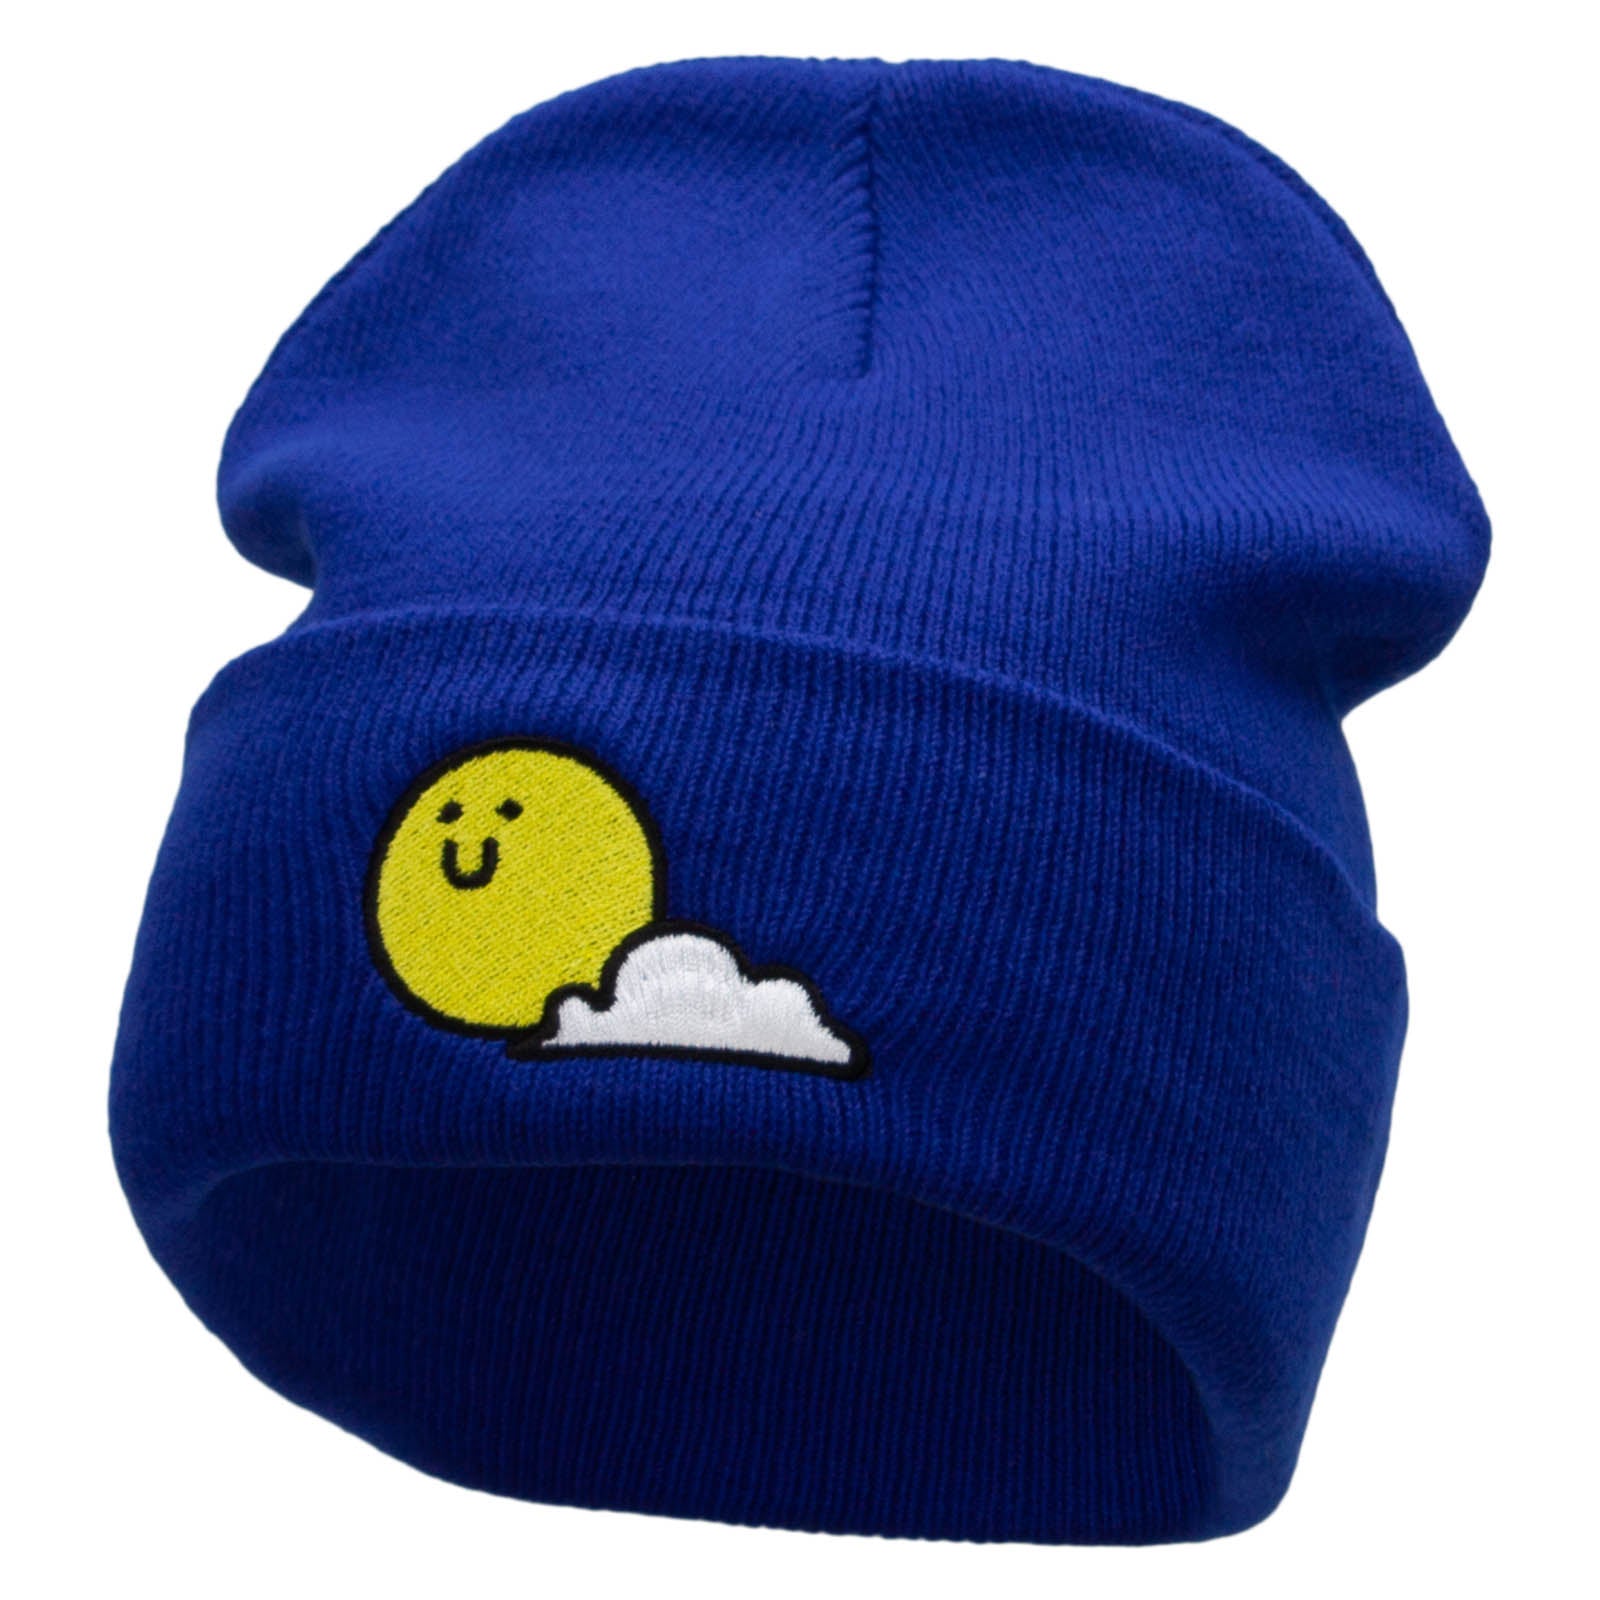 Sunny Smile Embroidered 12 Inch Long Knitted Beanie - Royal OSFM